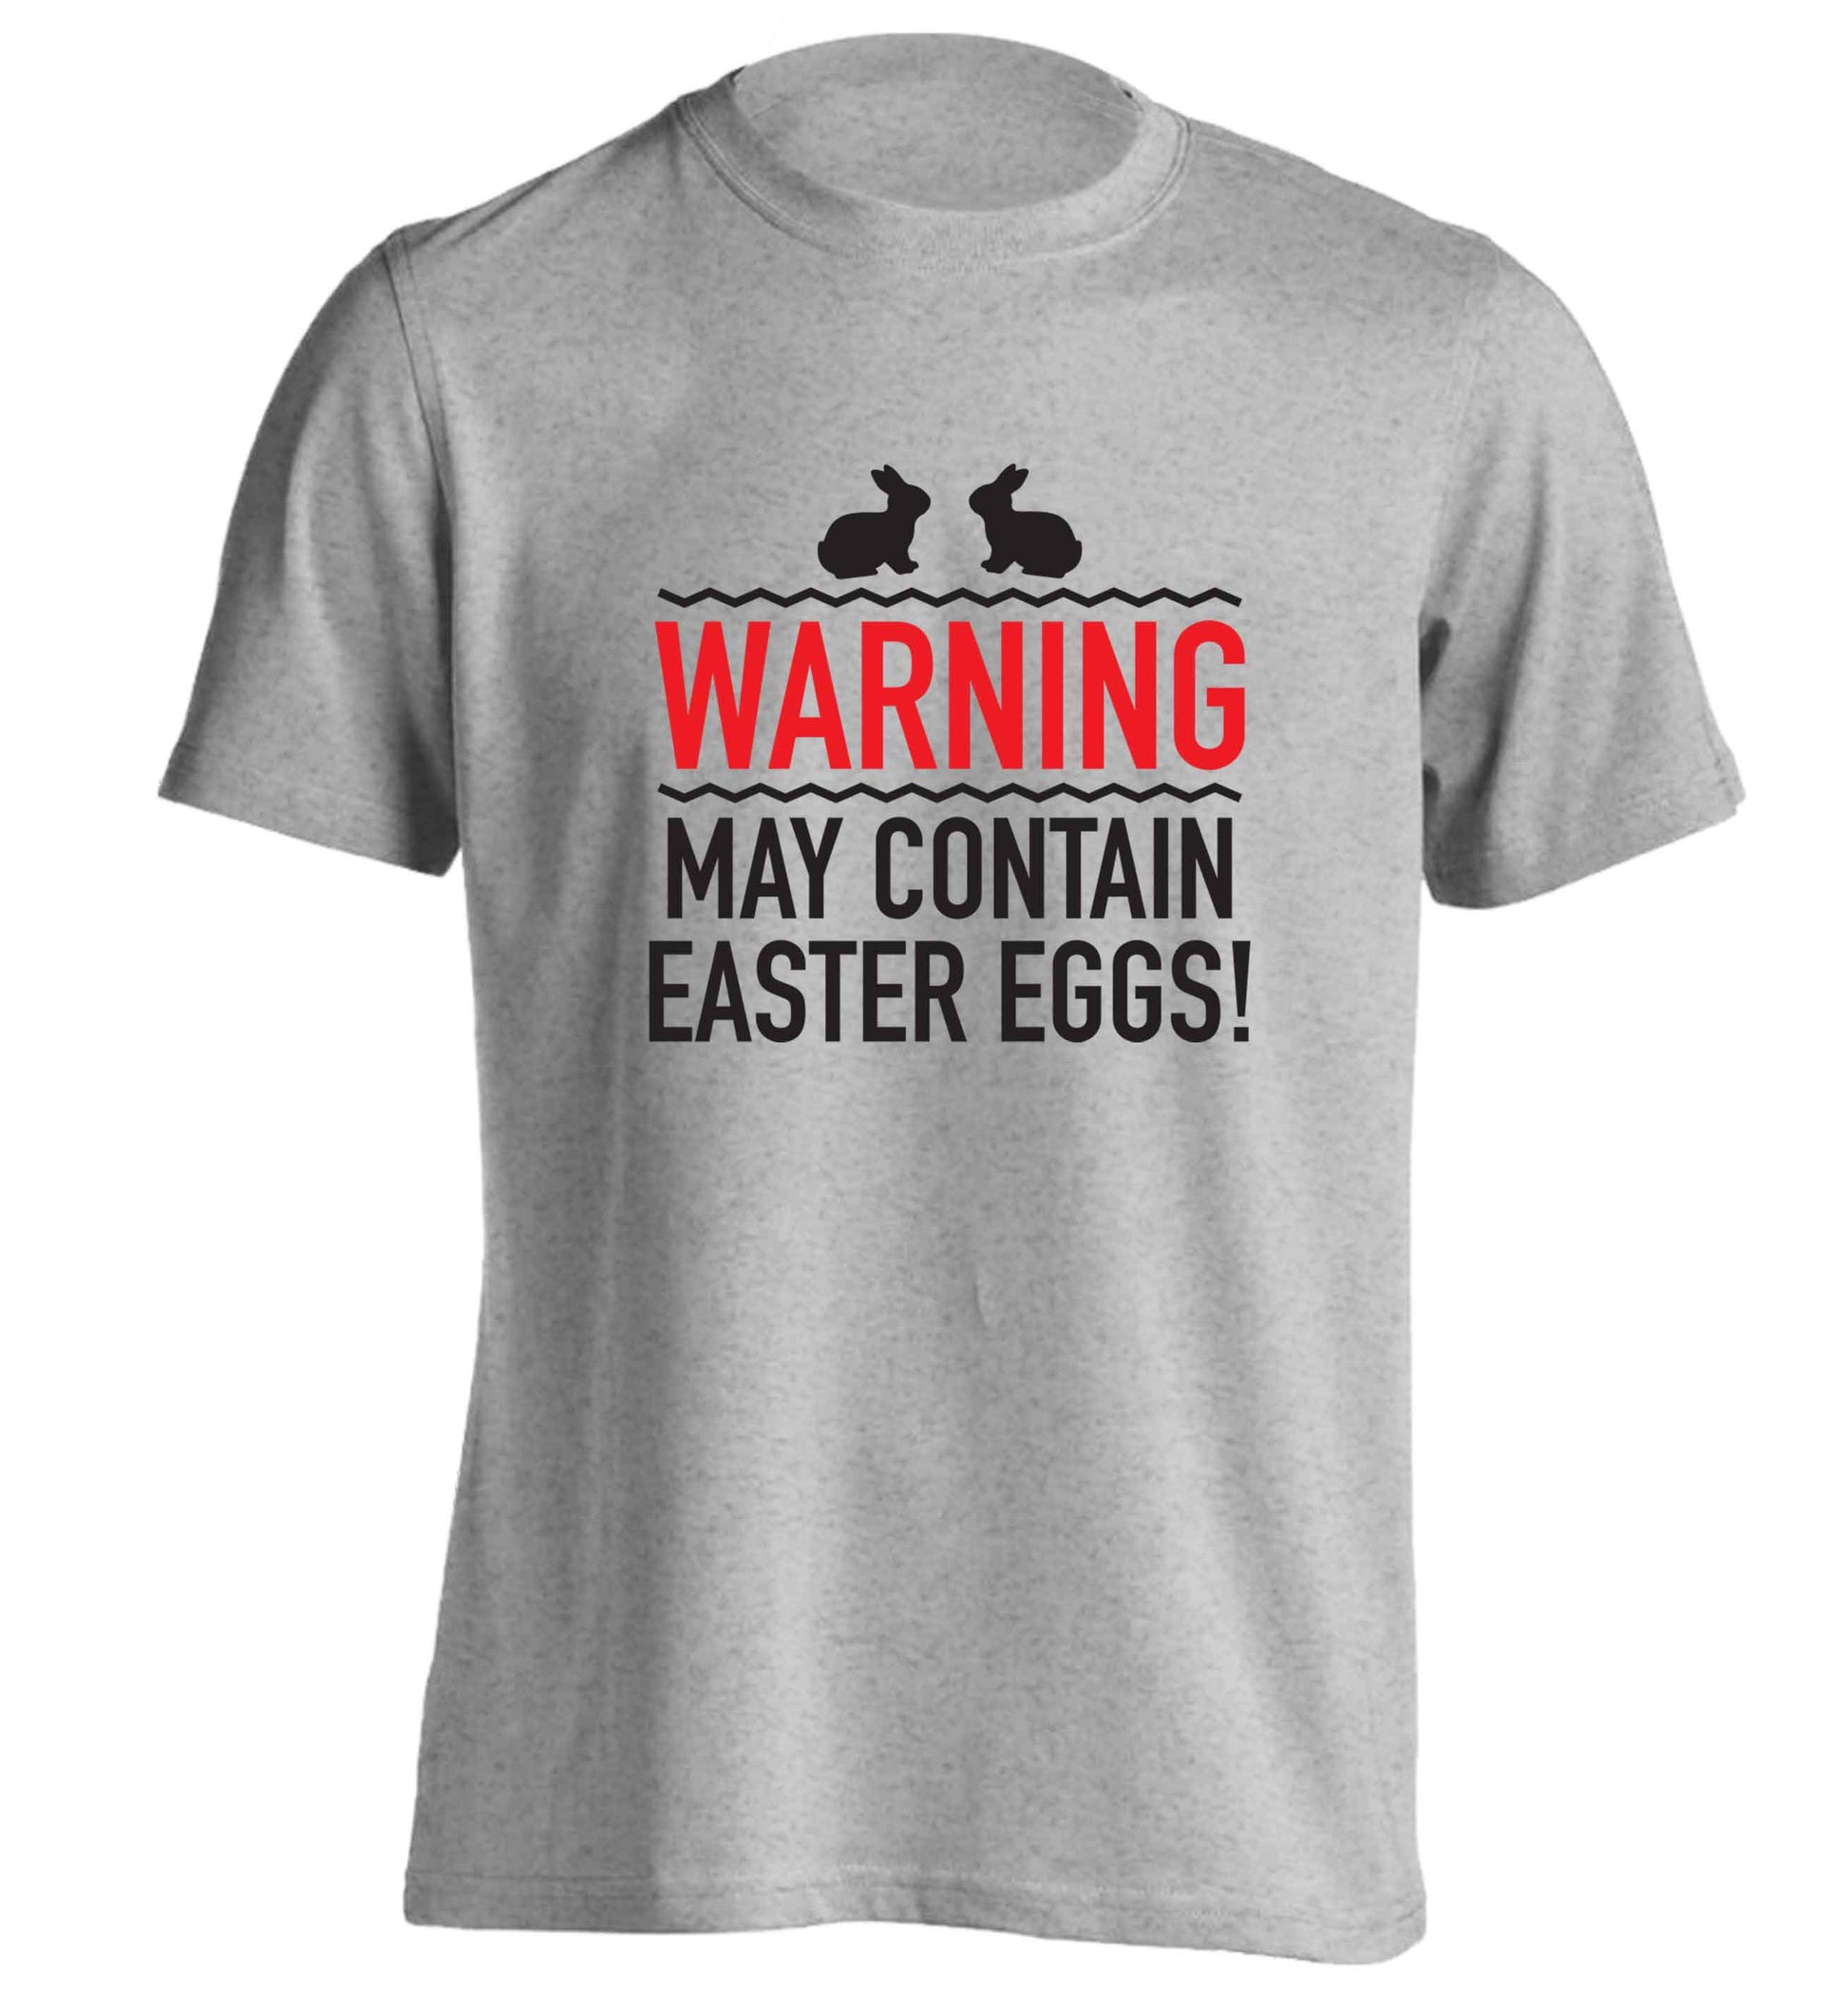 Warning may contain Easter eggs adults unisex grey Tshirt 2XL